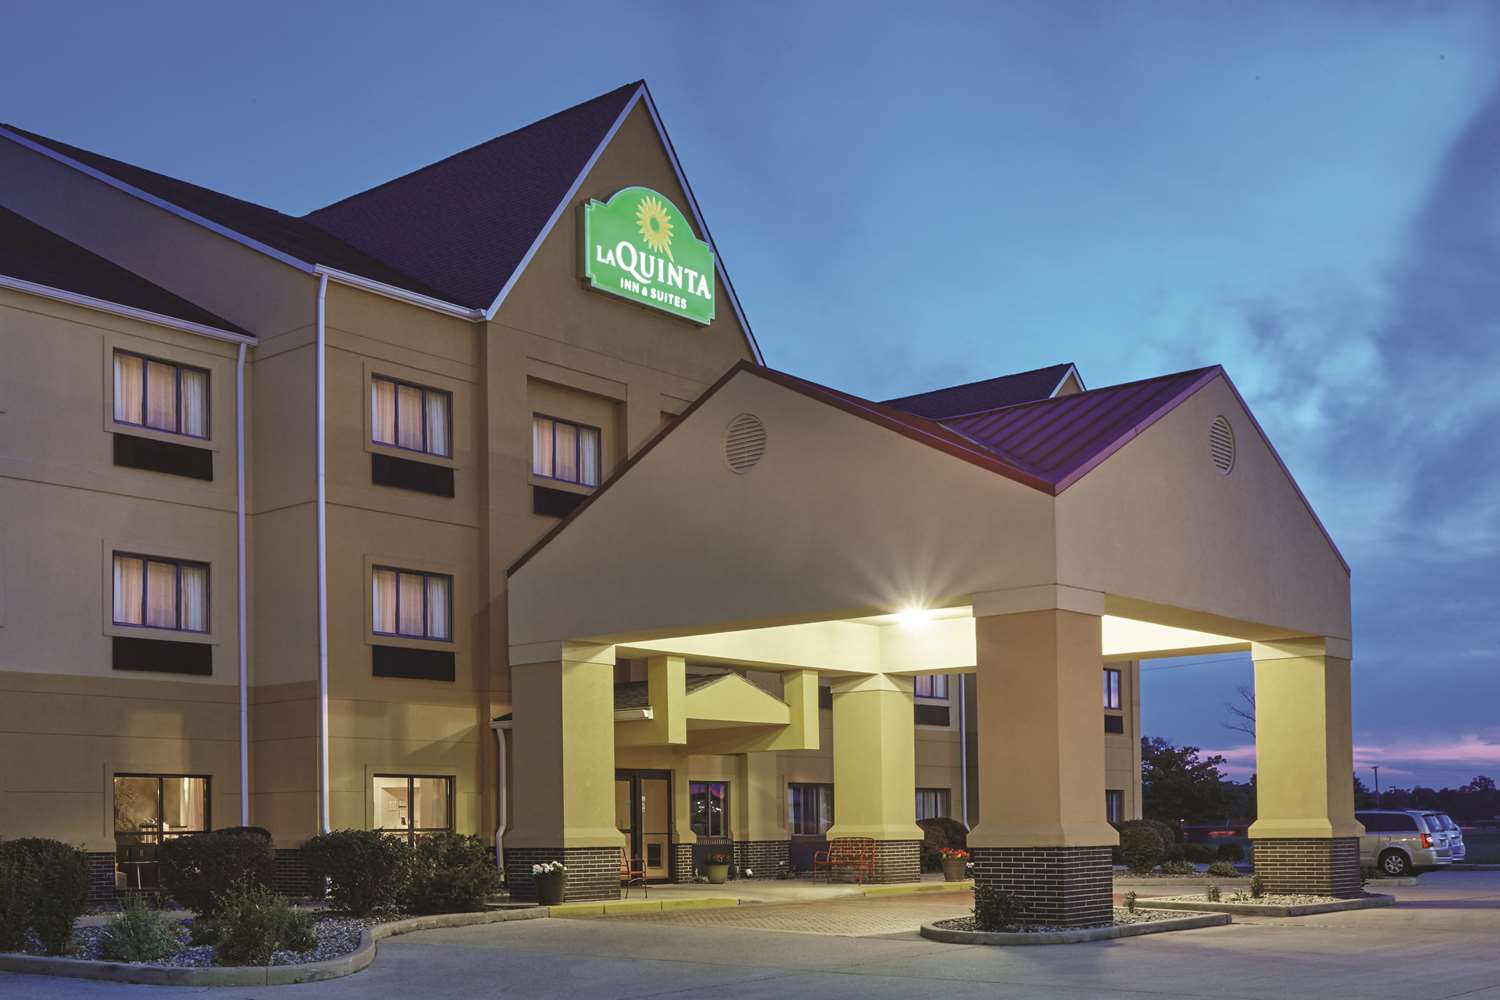 Pet Friendly La Quinta Inn & Suites South Bend in South Bend, Indiana